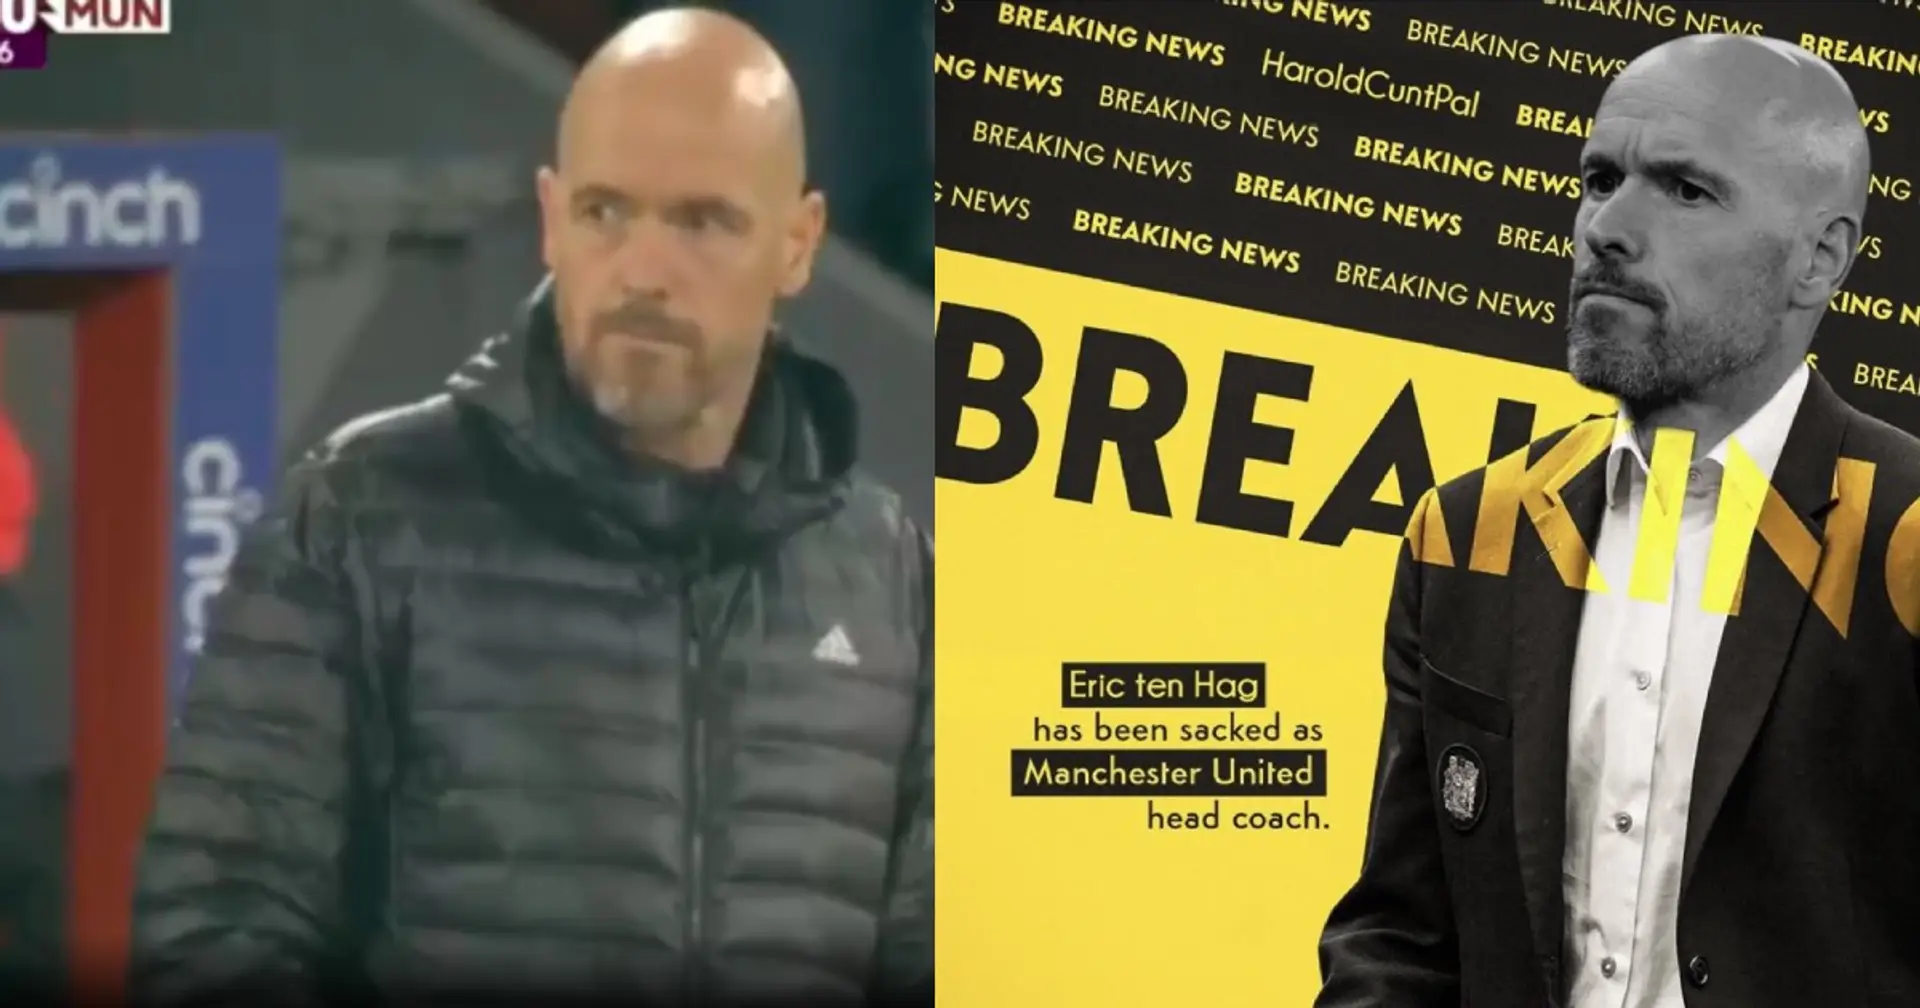 Man United fans 'break' news of Ten Hag sack after Crystal Palace humiliation 